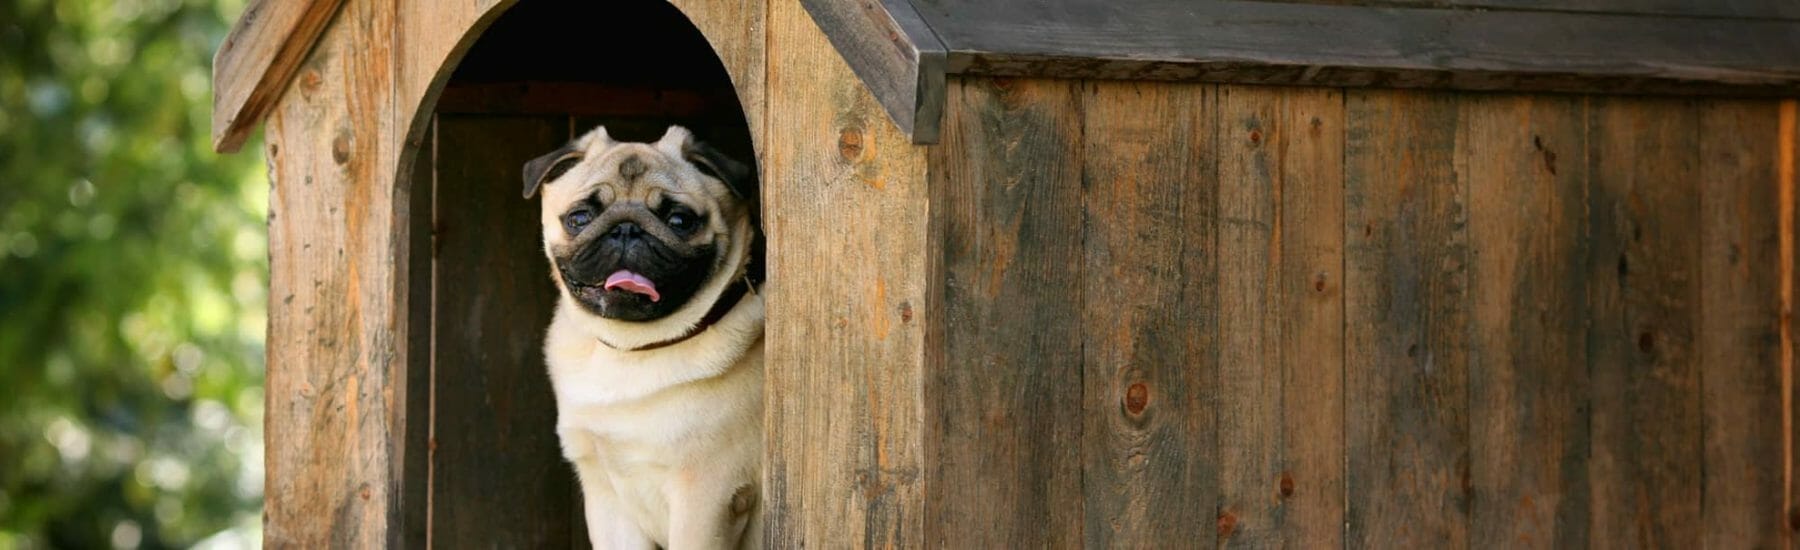 Pug sitting in large outdoor dog house